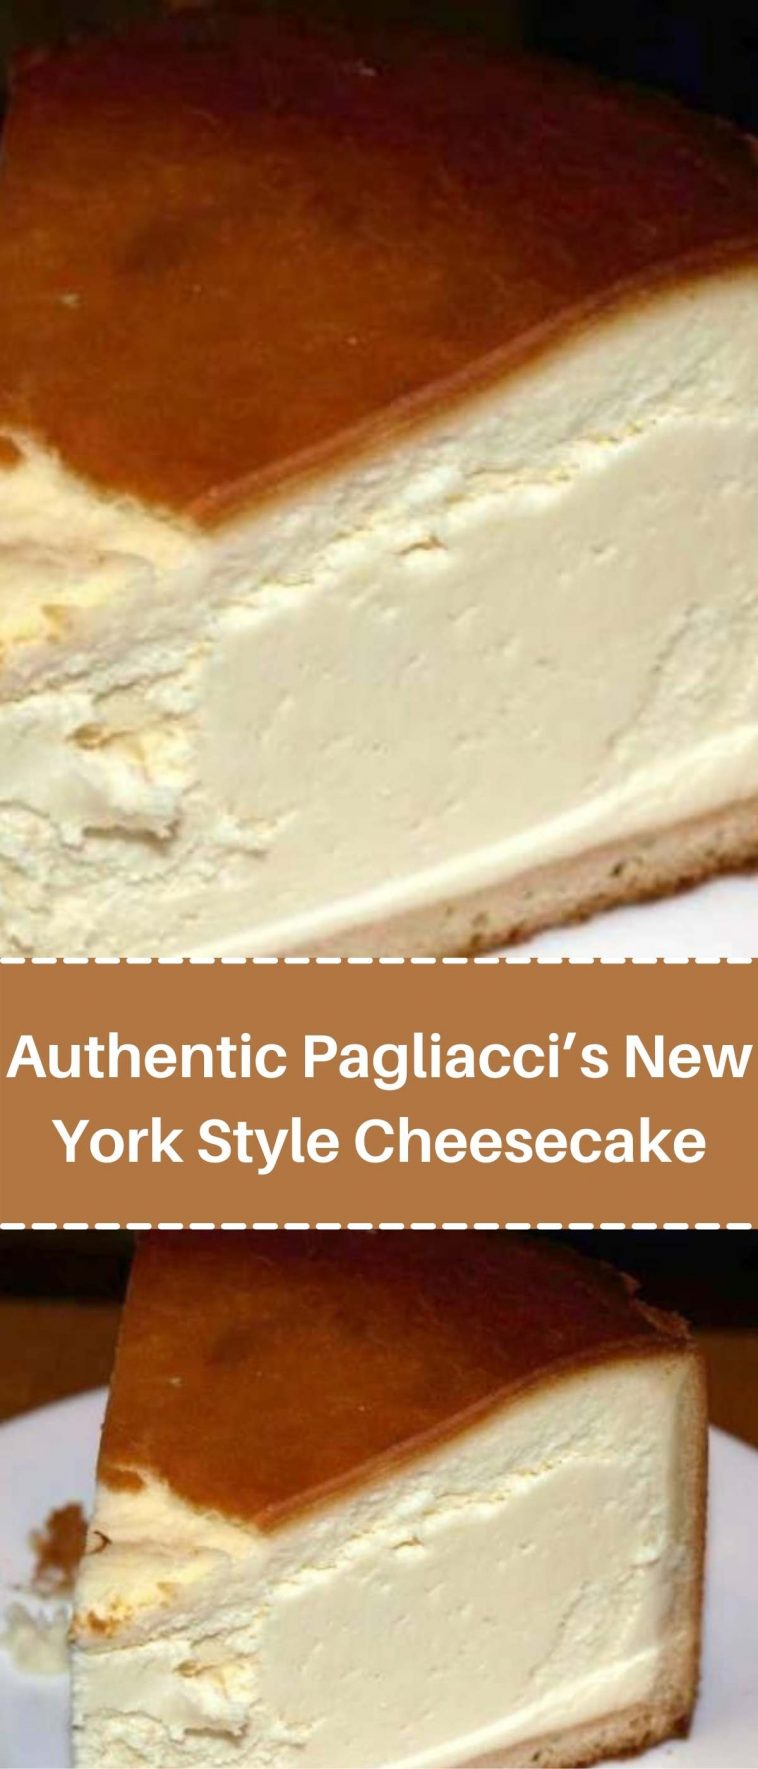 Authentic Pagliacci’s New York Style Cheesecake